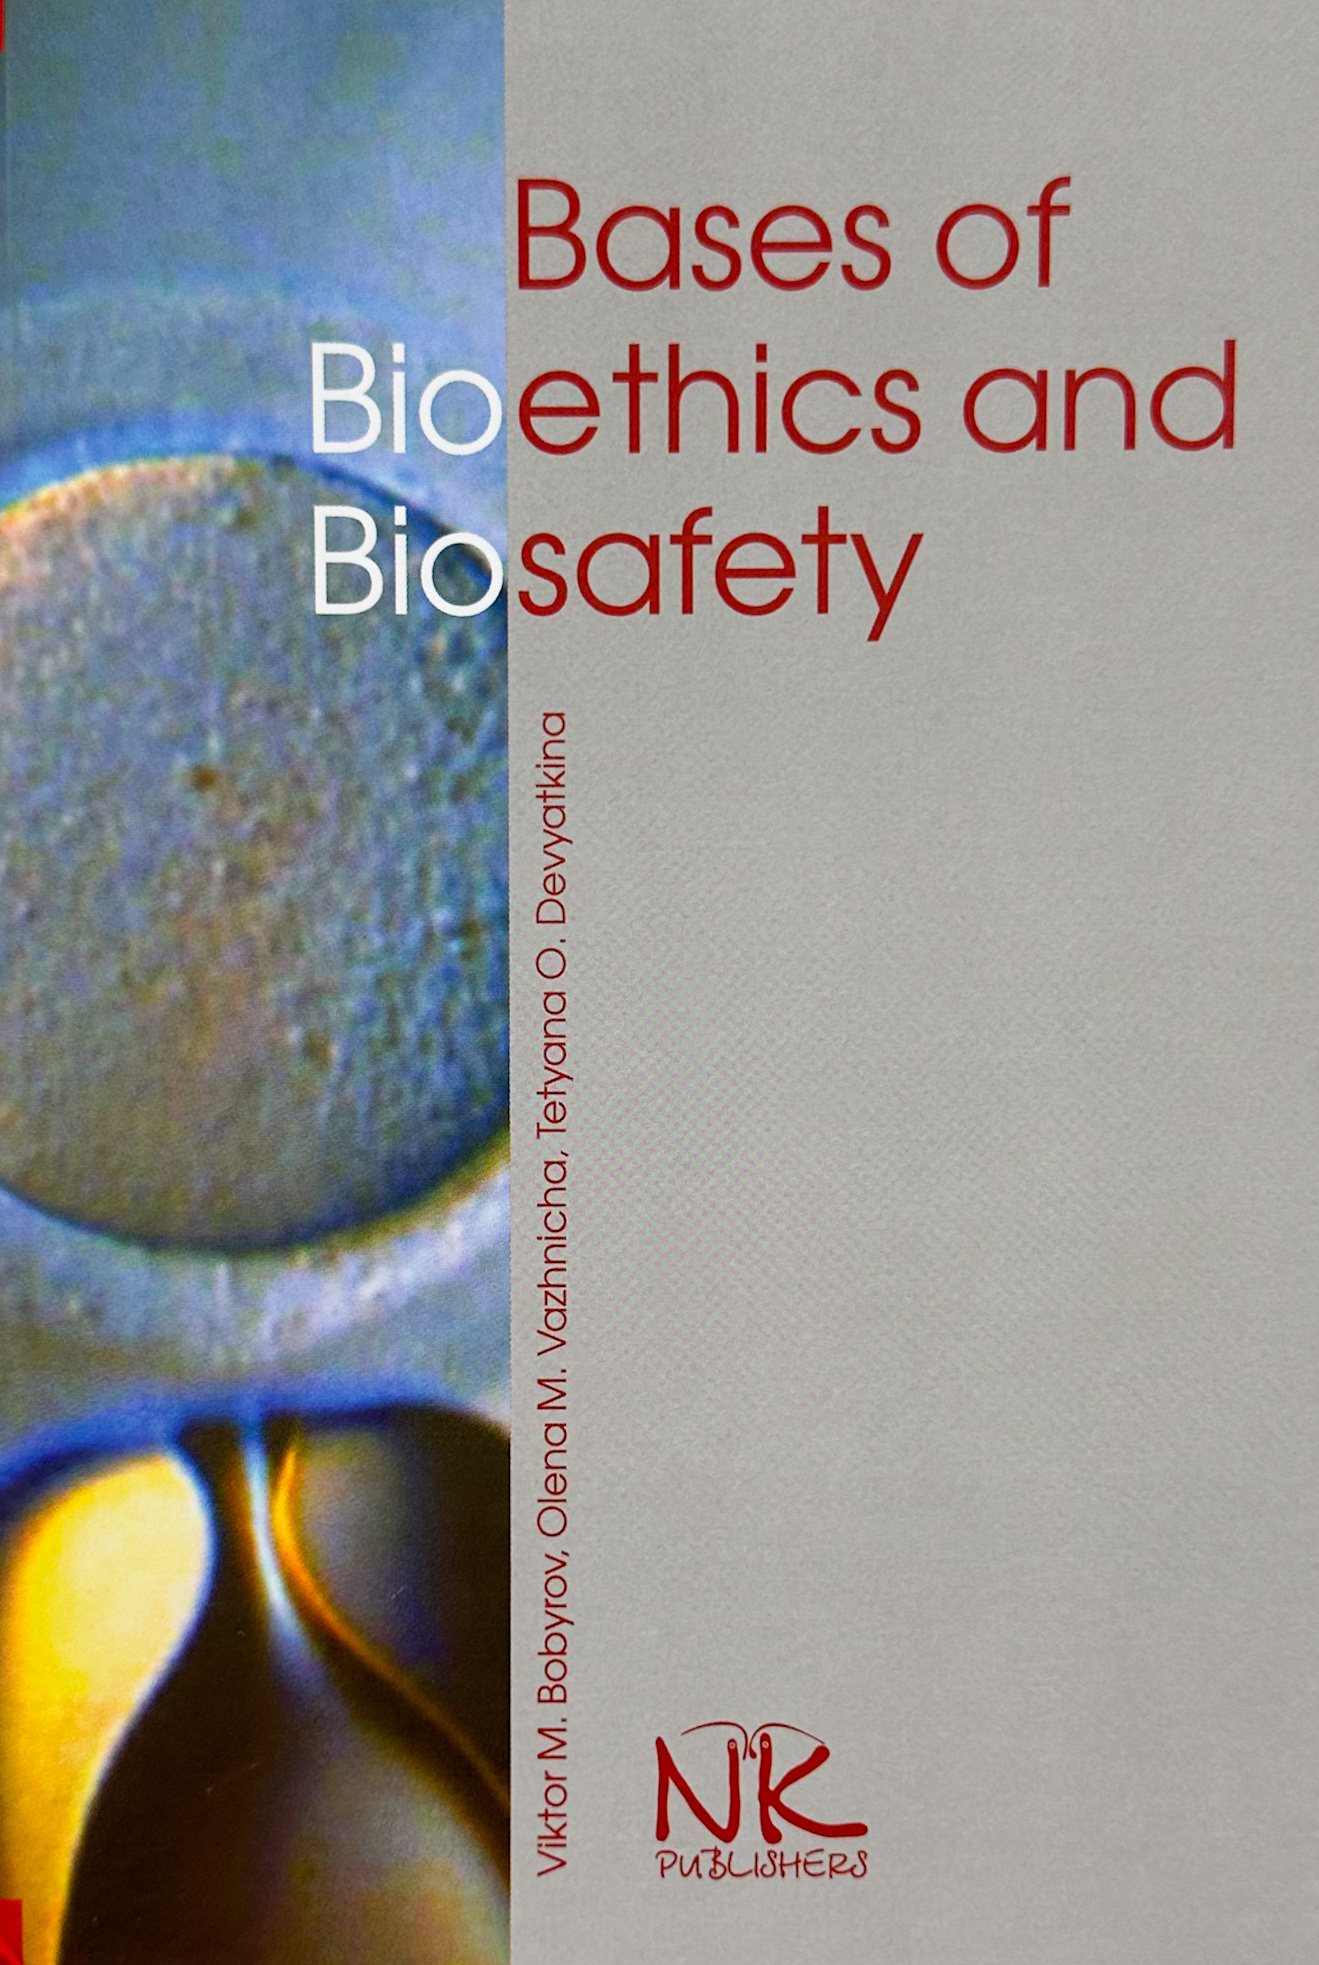 Bases of Bioethics and Biosafety